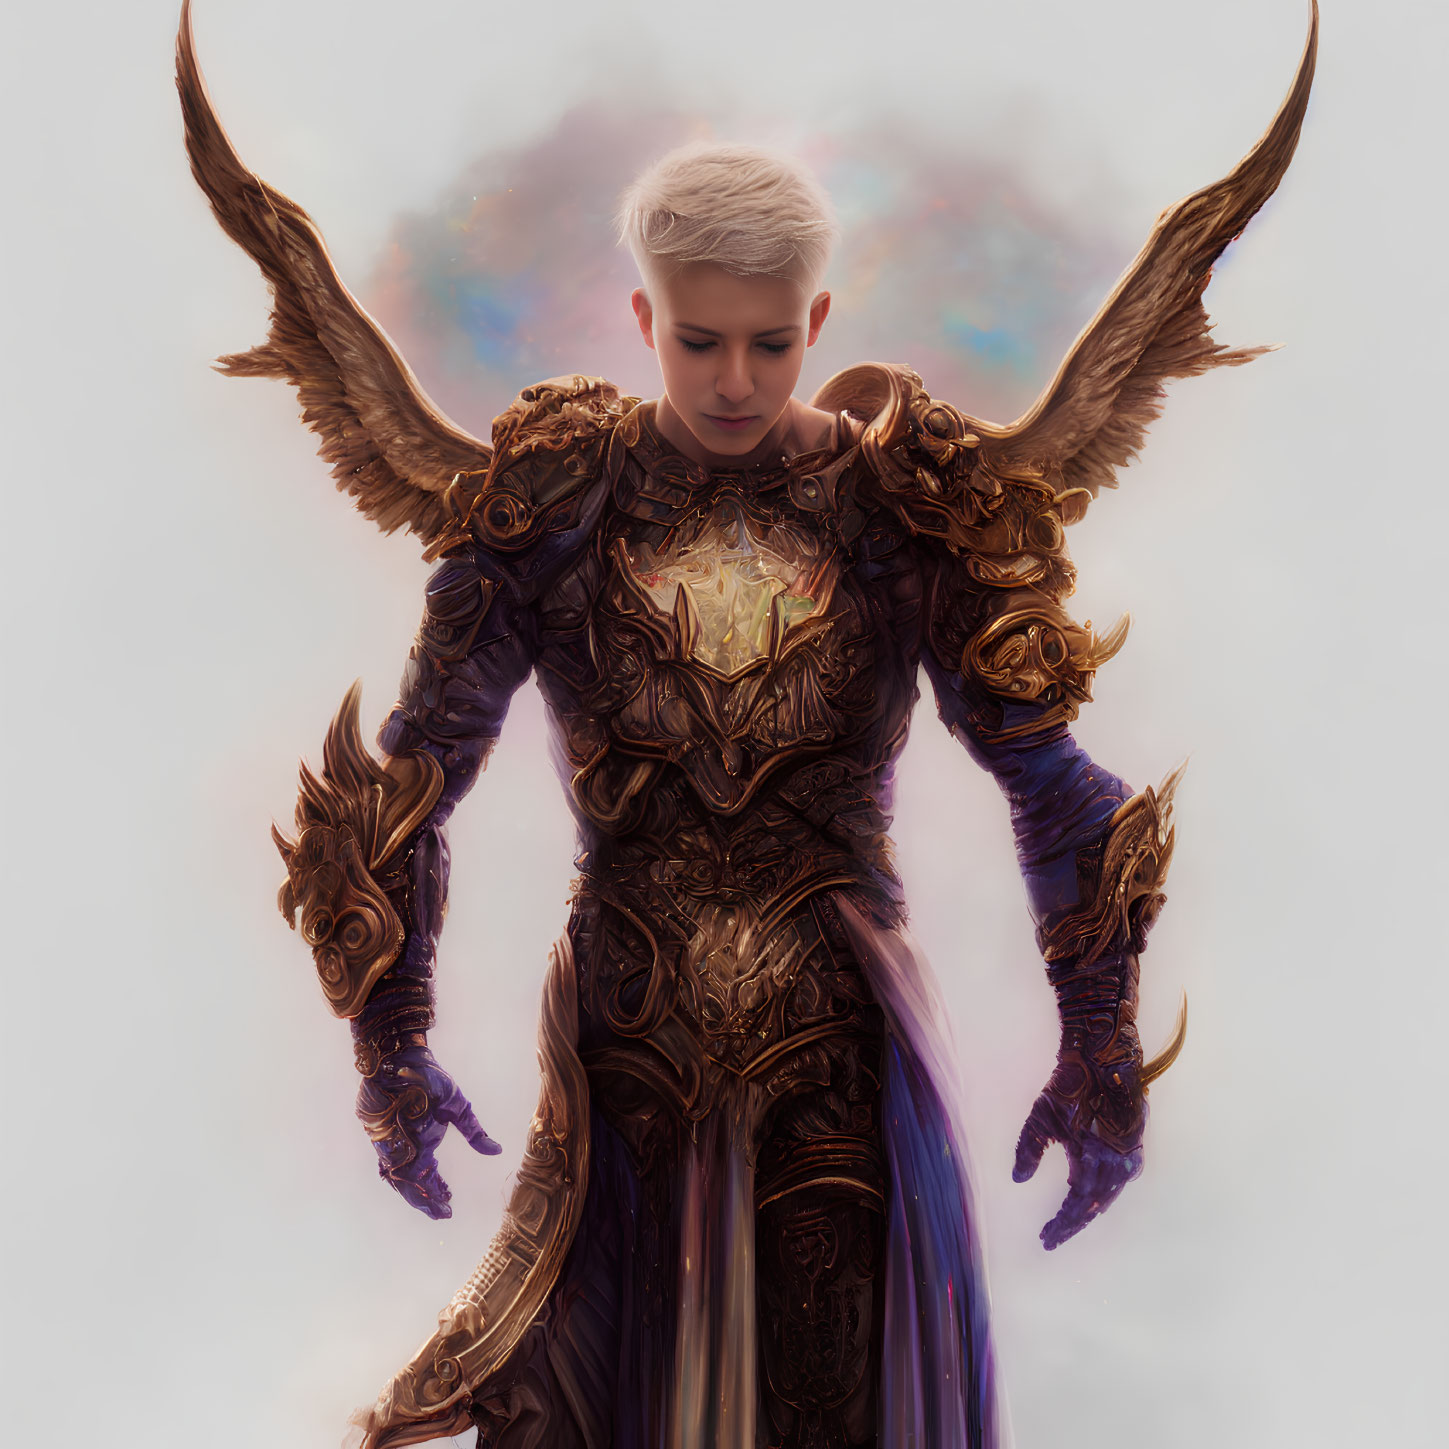 Short-haired person in golden winged armor exudes confidence